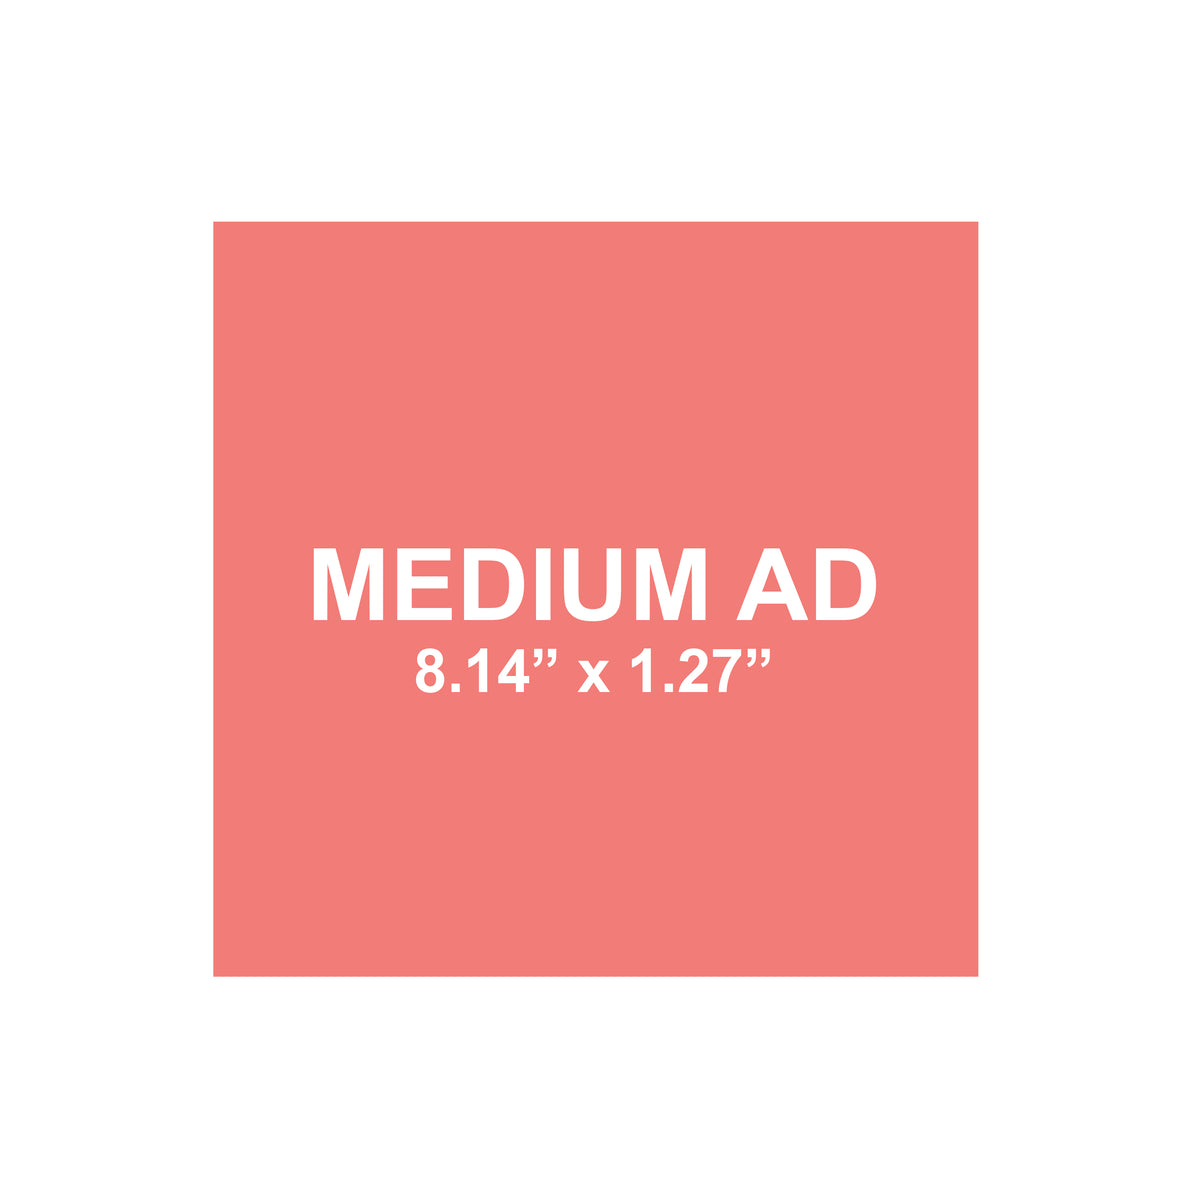 Medium Ad Space | The Small Business Publicist